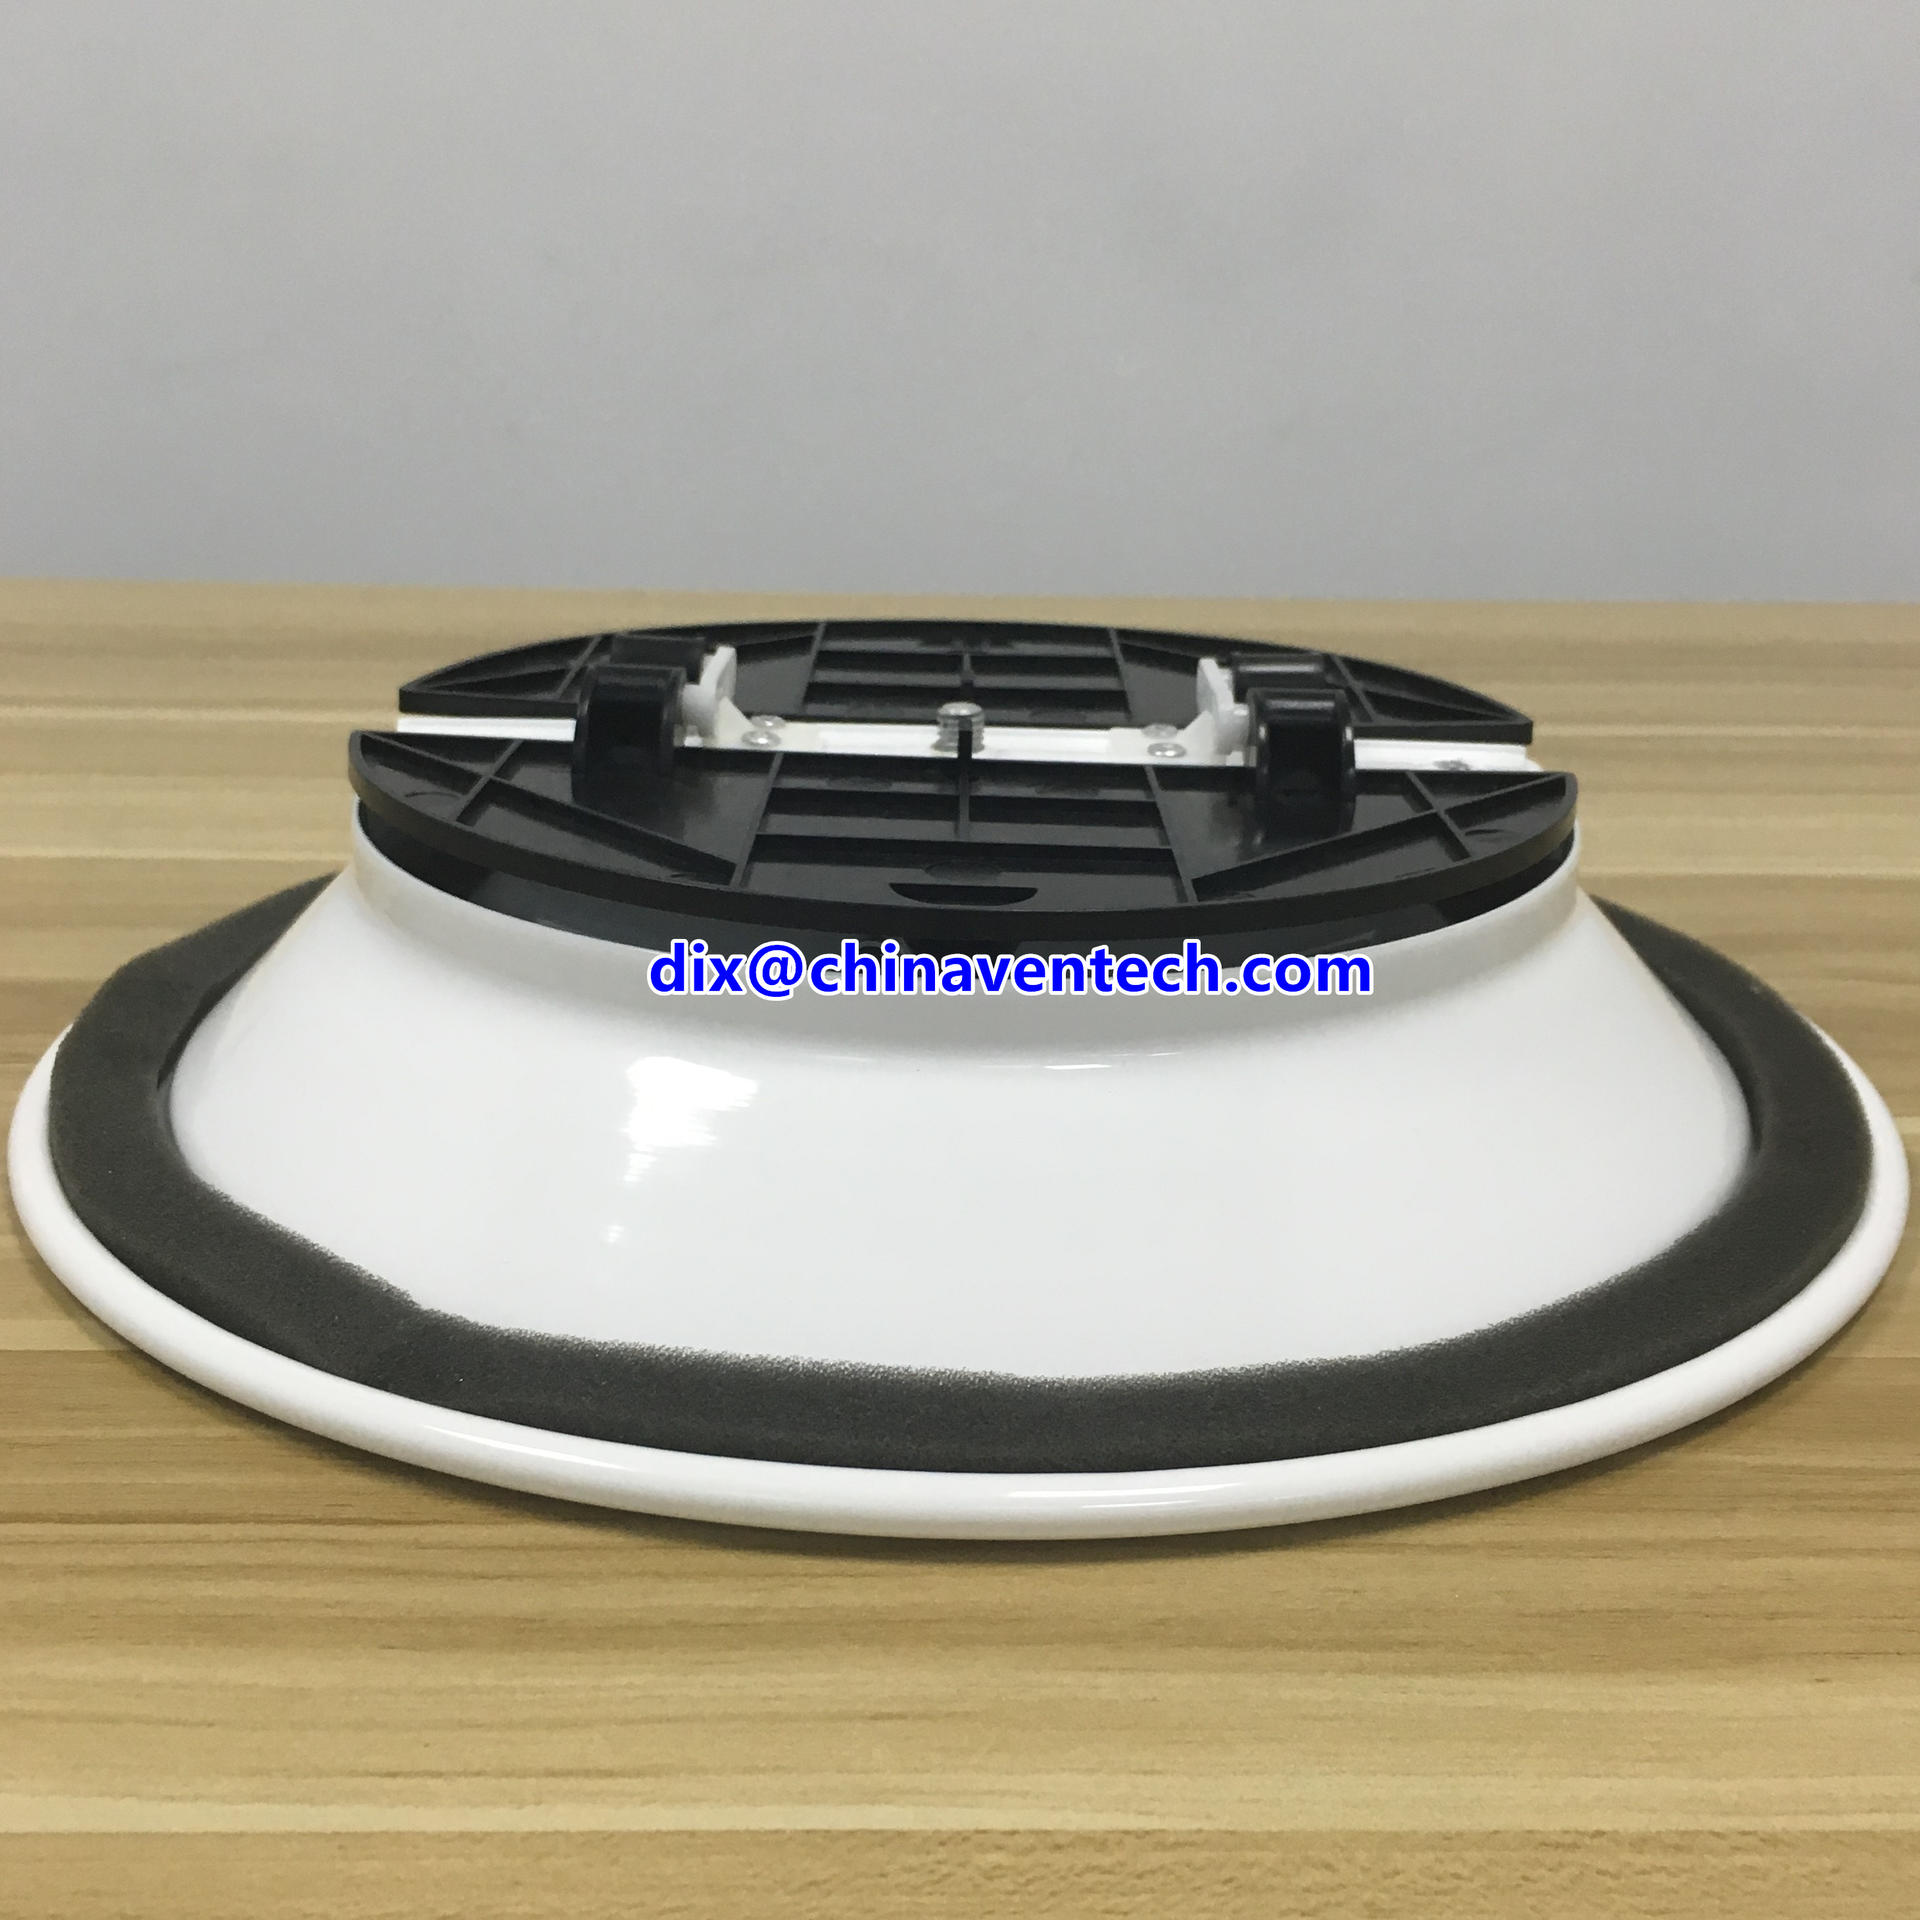 Hvac System Conditioner Vent Covers Adjustable Round Ceiling Air Vent Circular Diffuser with Damper